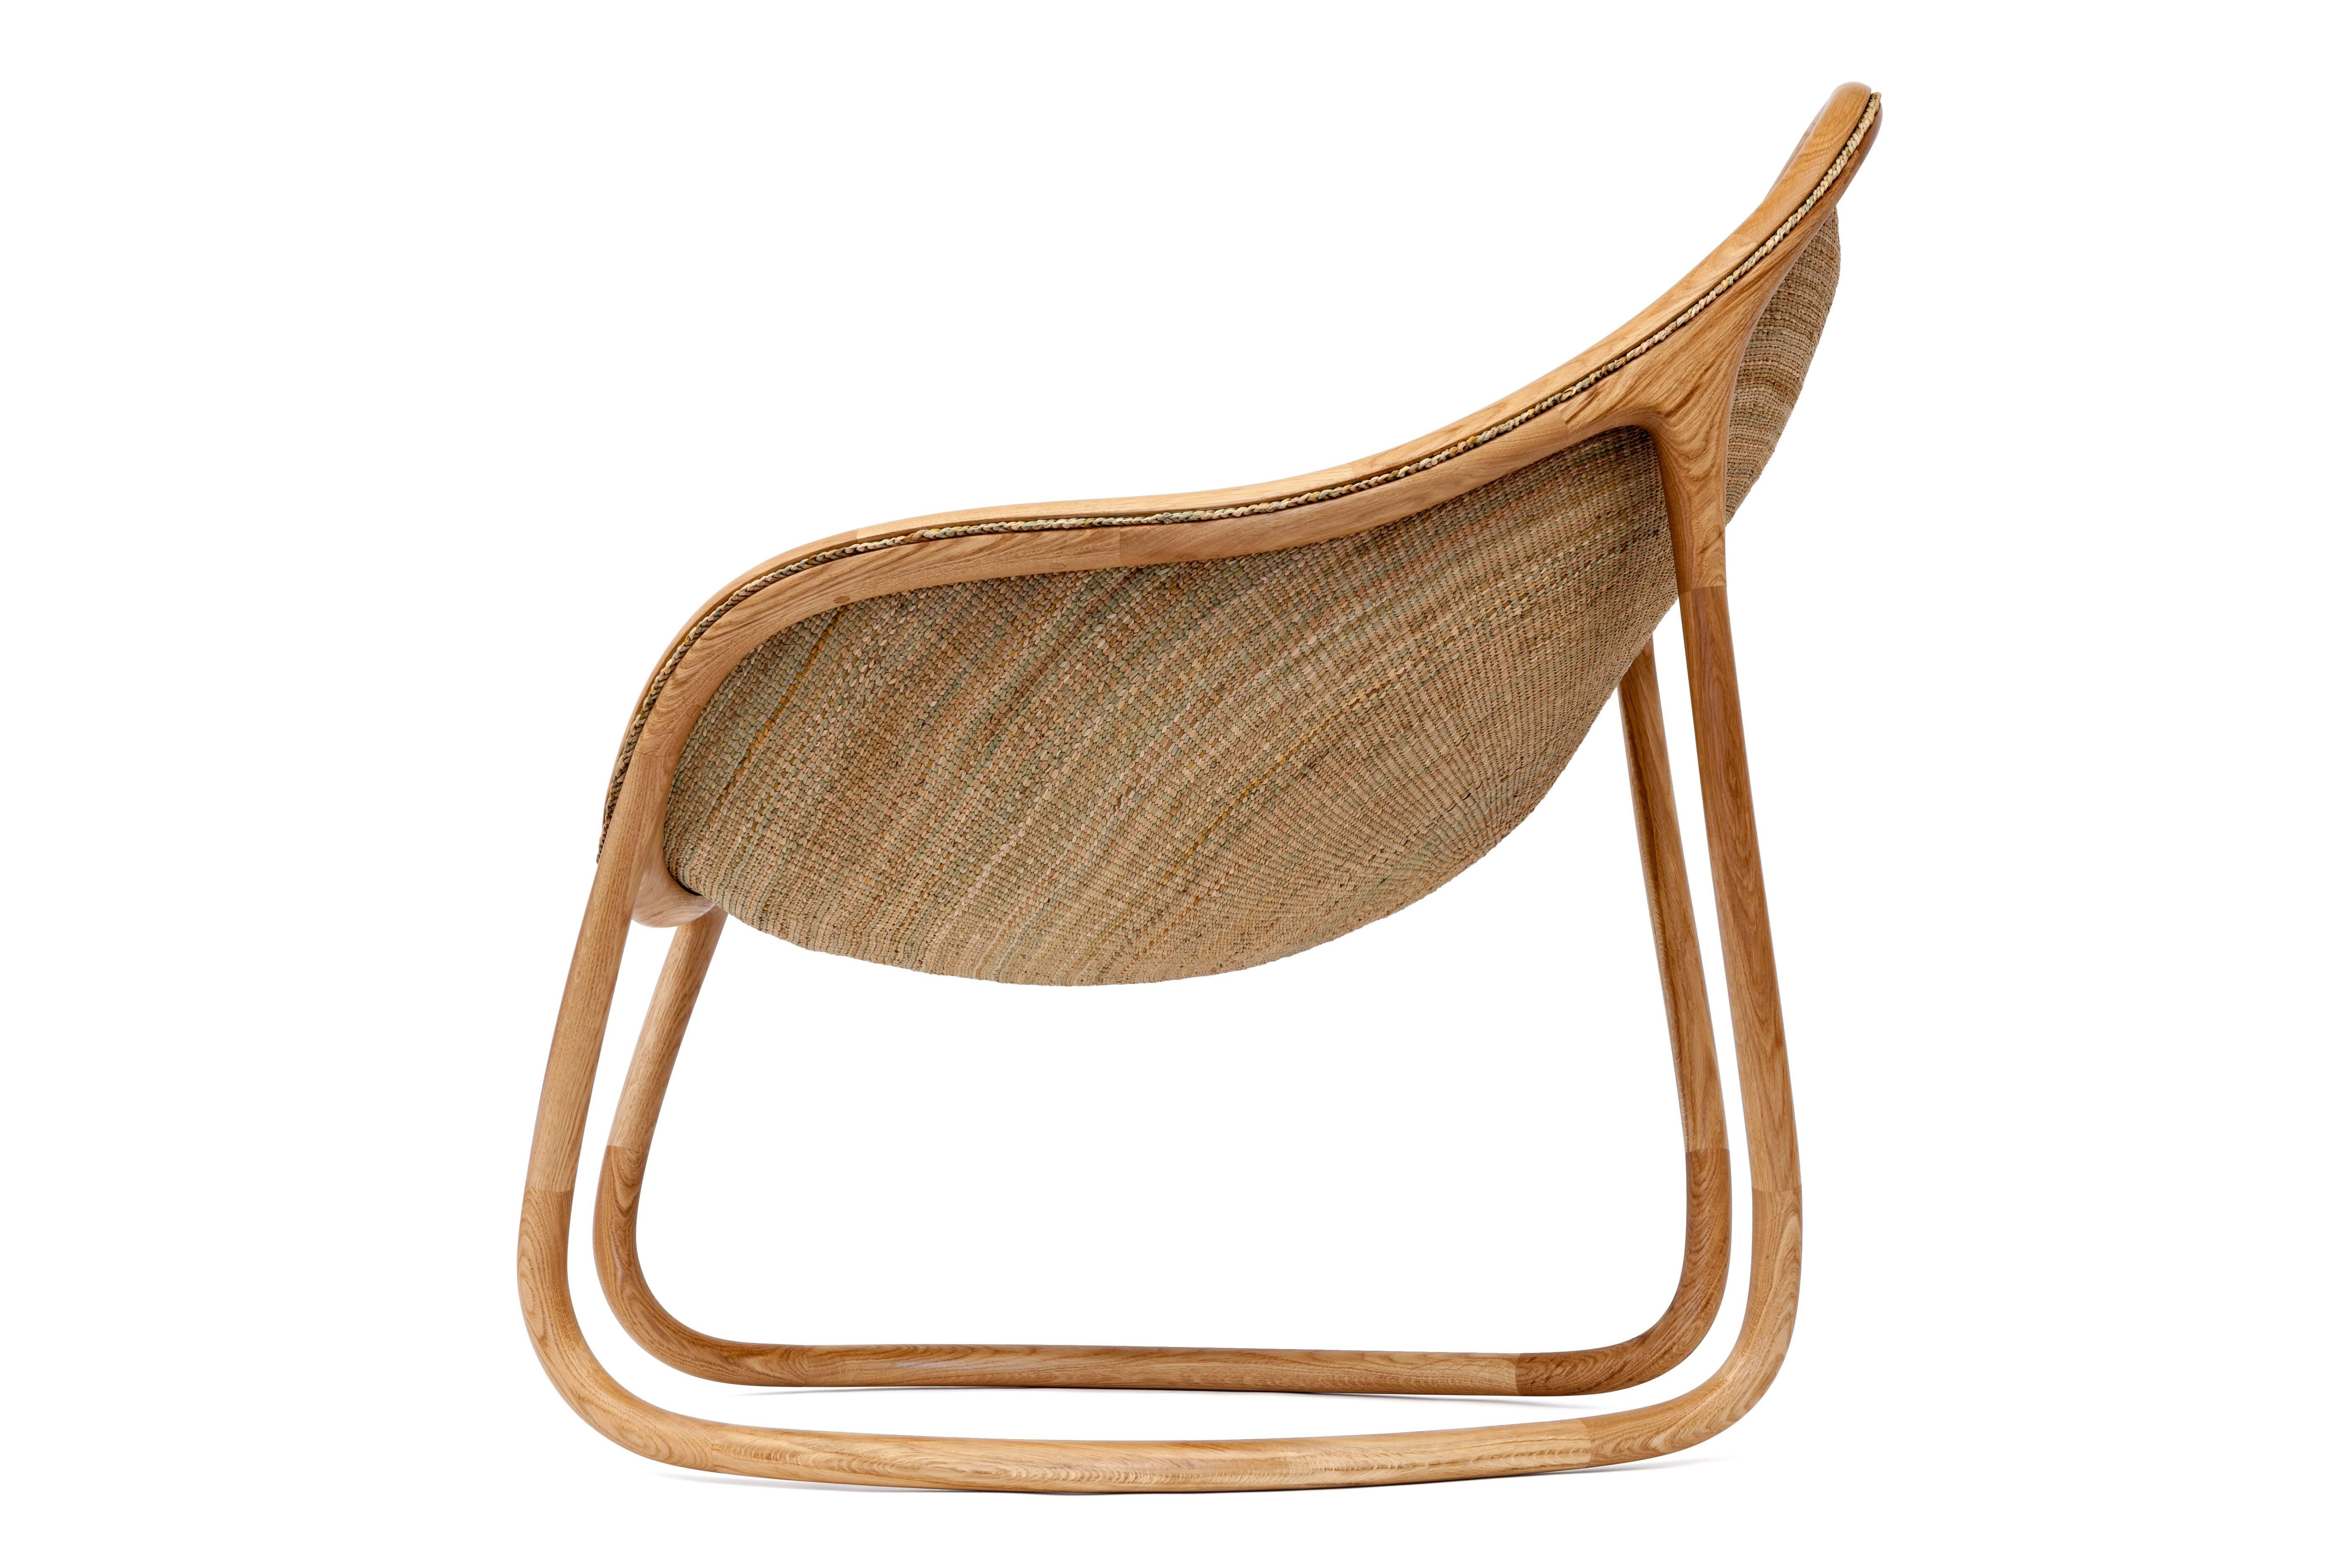 Milled from English oak using five axis CNC, the chair is a composition of 28 sculptural components designed and assembled by Christopher Jenner.
The seat was woven by Felicity Irons using Scirpus Lacustris, a native English Rush she harvests on